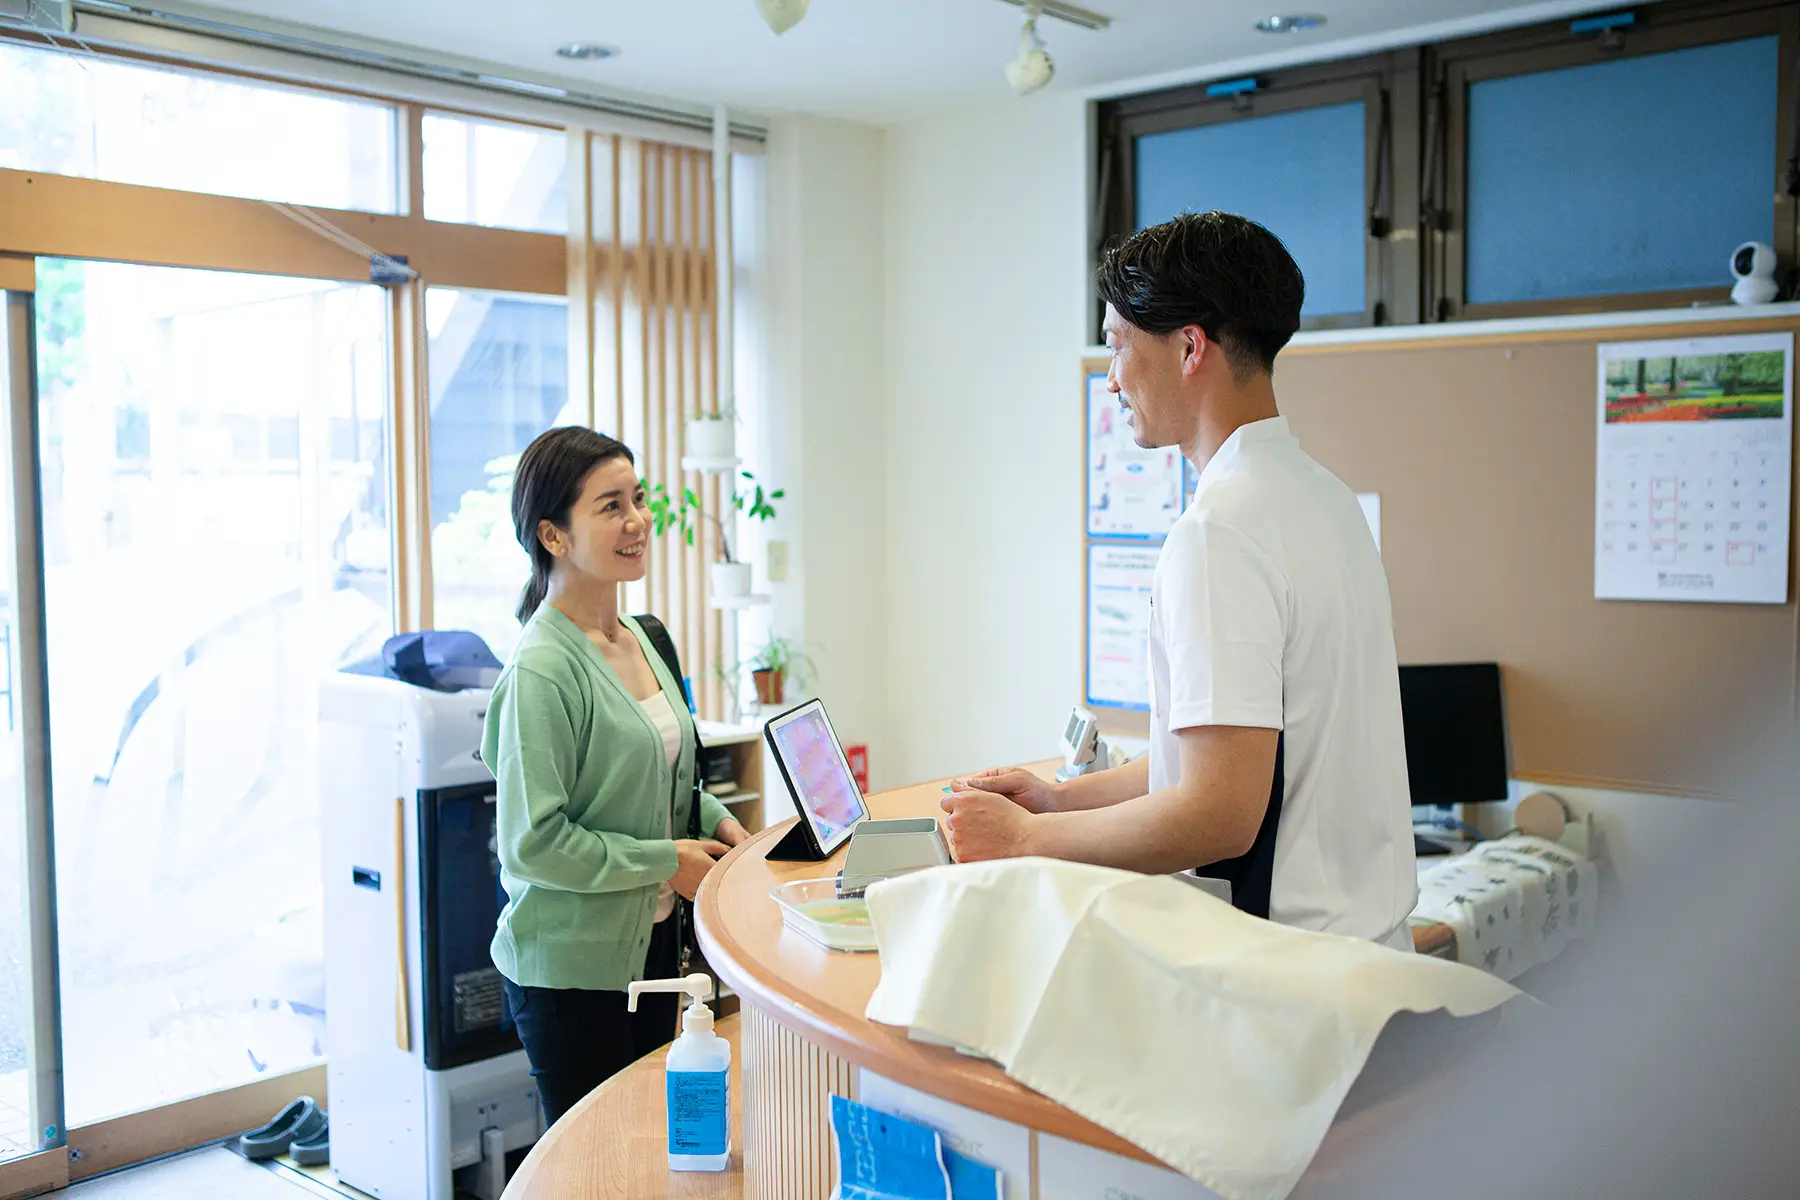 A woman paying for dental treatment at reception